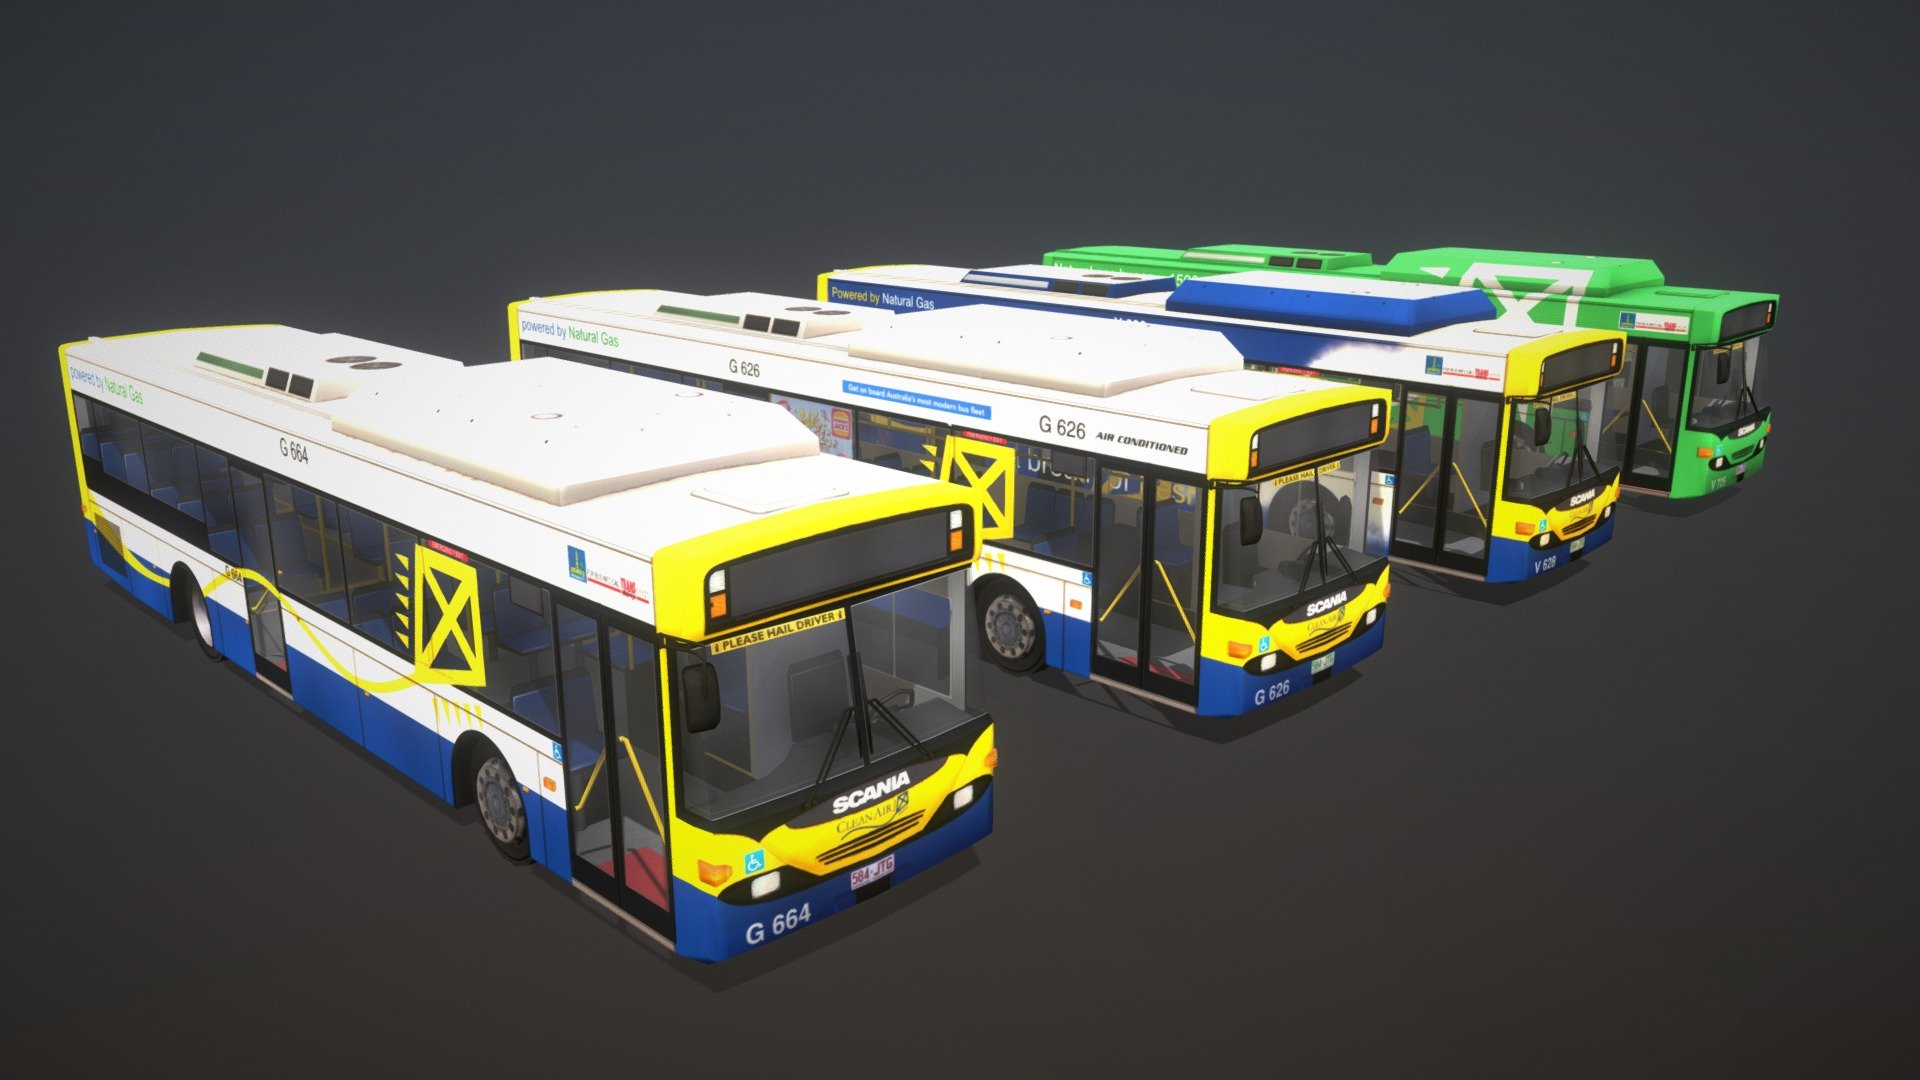 A revamp of my Brisbane City Council Scania L94UB CNG [Volgren] intended for use in Transport Fever 2.

TpF2 Workshop Item: https://steamcommunity.com/sharedfiles/filedetails/?id=2594990377

Trivia:
Once typical of Brisbane’s fleet is this Scania L94UB with Volgren CR224L bodywork. The standard Volgren body has been altered in appearance with a normal Scania front. The kite symbol reflects the bus’ green credentials being CNG powered. The G prefix denotes its allocation to the Garden City depot which feeds the busway. Sadly in 2020, the Scania L94UB fleet have been retired from service and replaced by the Volvo B8RLE buses.

Info from https://www.showbus.co.uk/australia/gallery/brisscan.htm

Model Details
Head lights/Blink lights/Brake lights: True
Door Animations: True
Tris: 2,136 (exterior) / 4,259 (interior) [lod0]
Textures: TGA 2048x2048 (exterior) / TGA 512x512 (interior) - Brisbane City Scania L94UB Bus Pack (LHD) - Buy Royalty Free 3D model by Jotrain 3d model